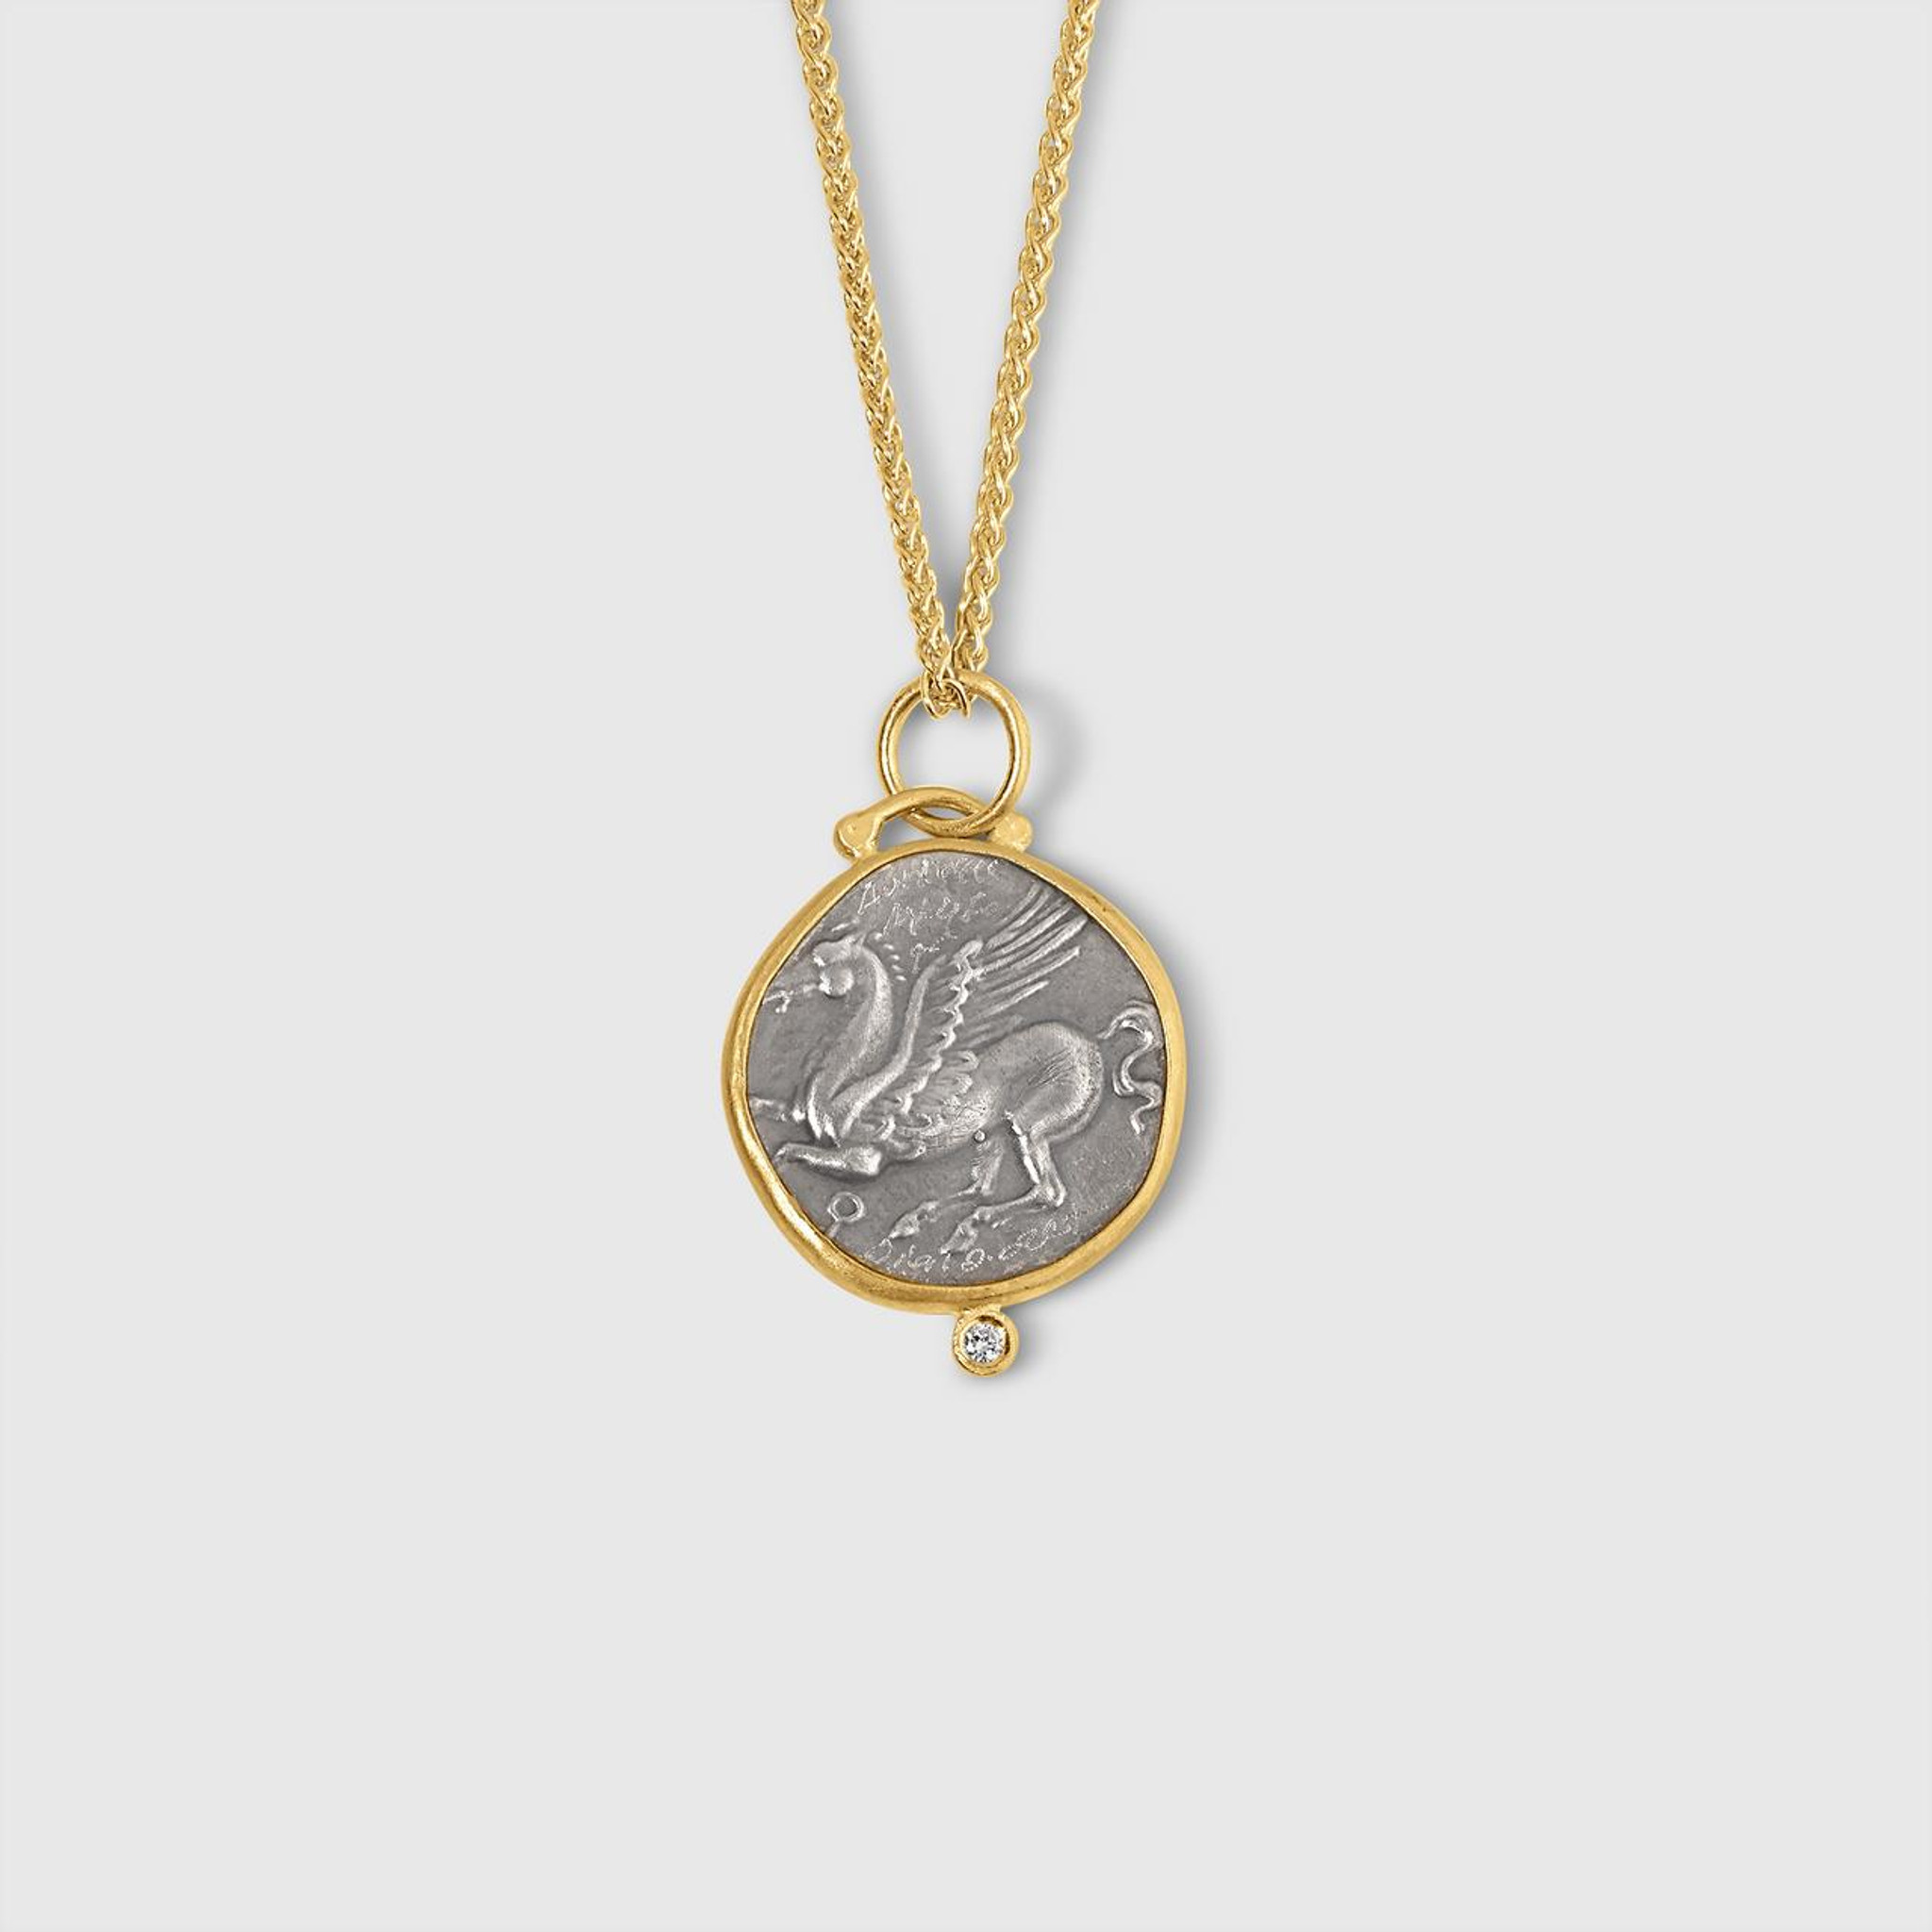 Prehistoric Works Medium Pegasus Charm Pendant Necklace with Athena on Back of Coin Replica 